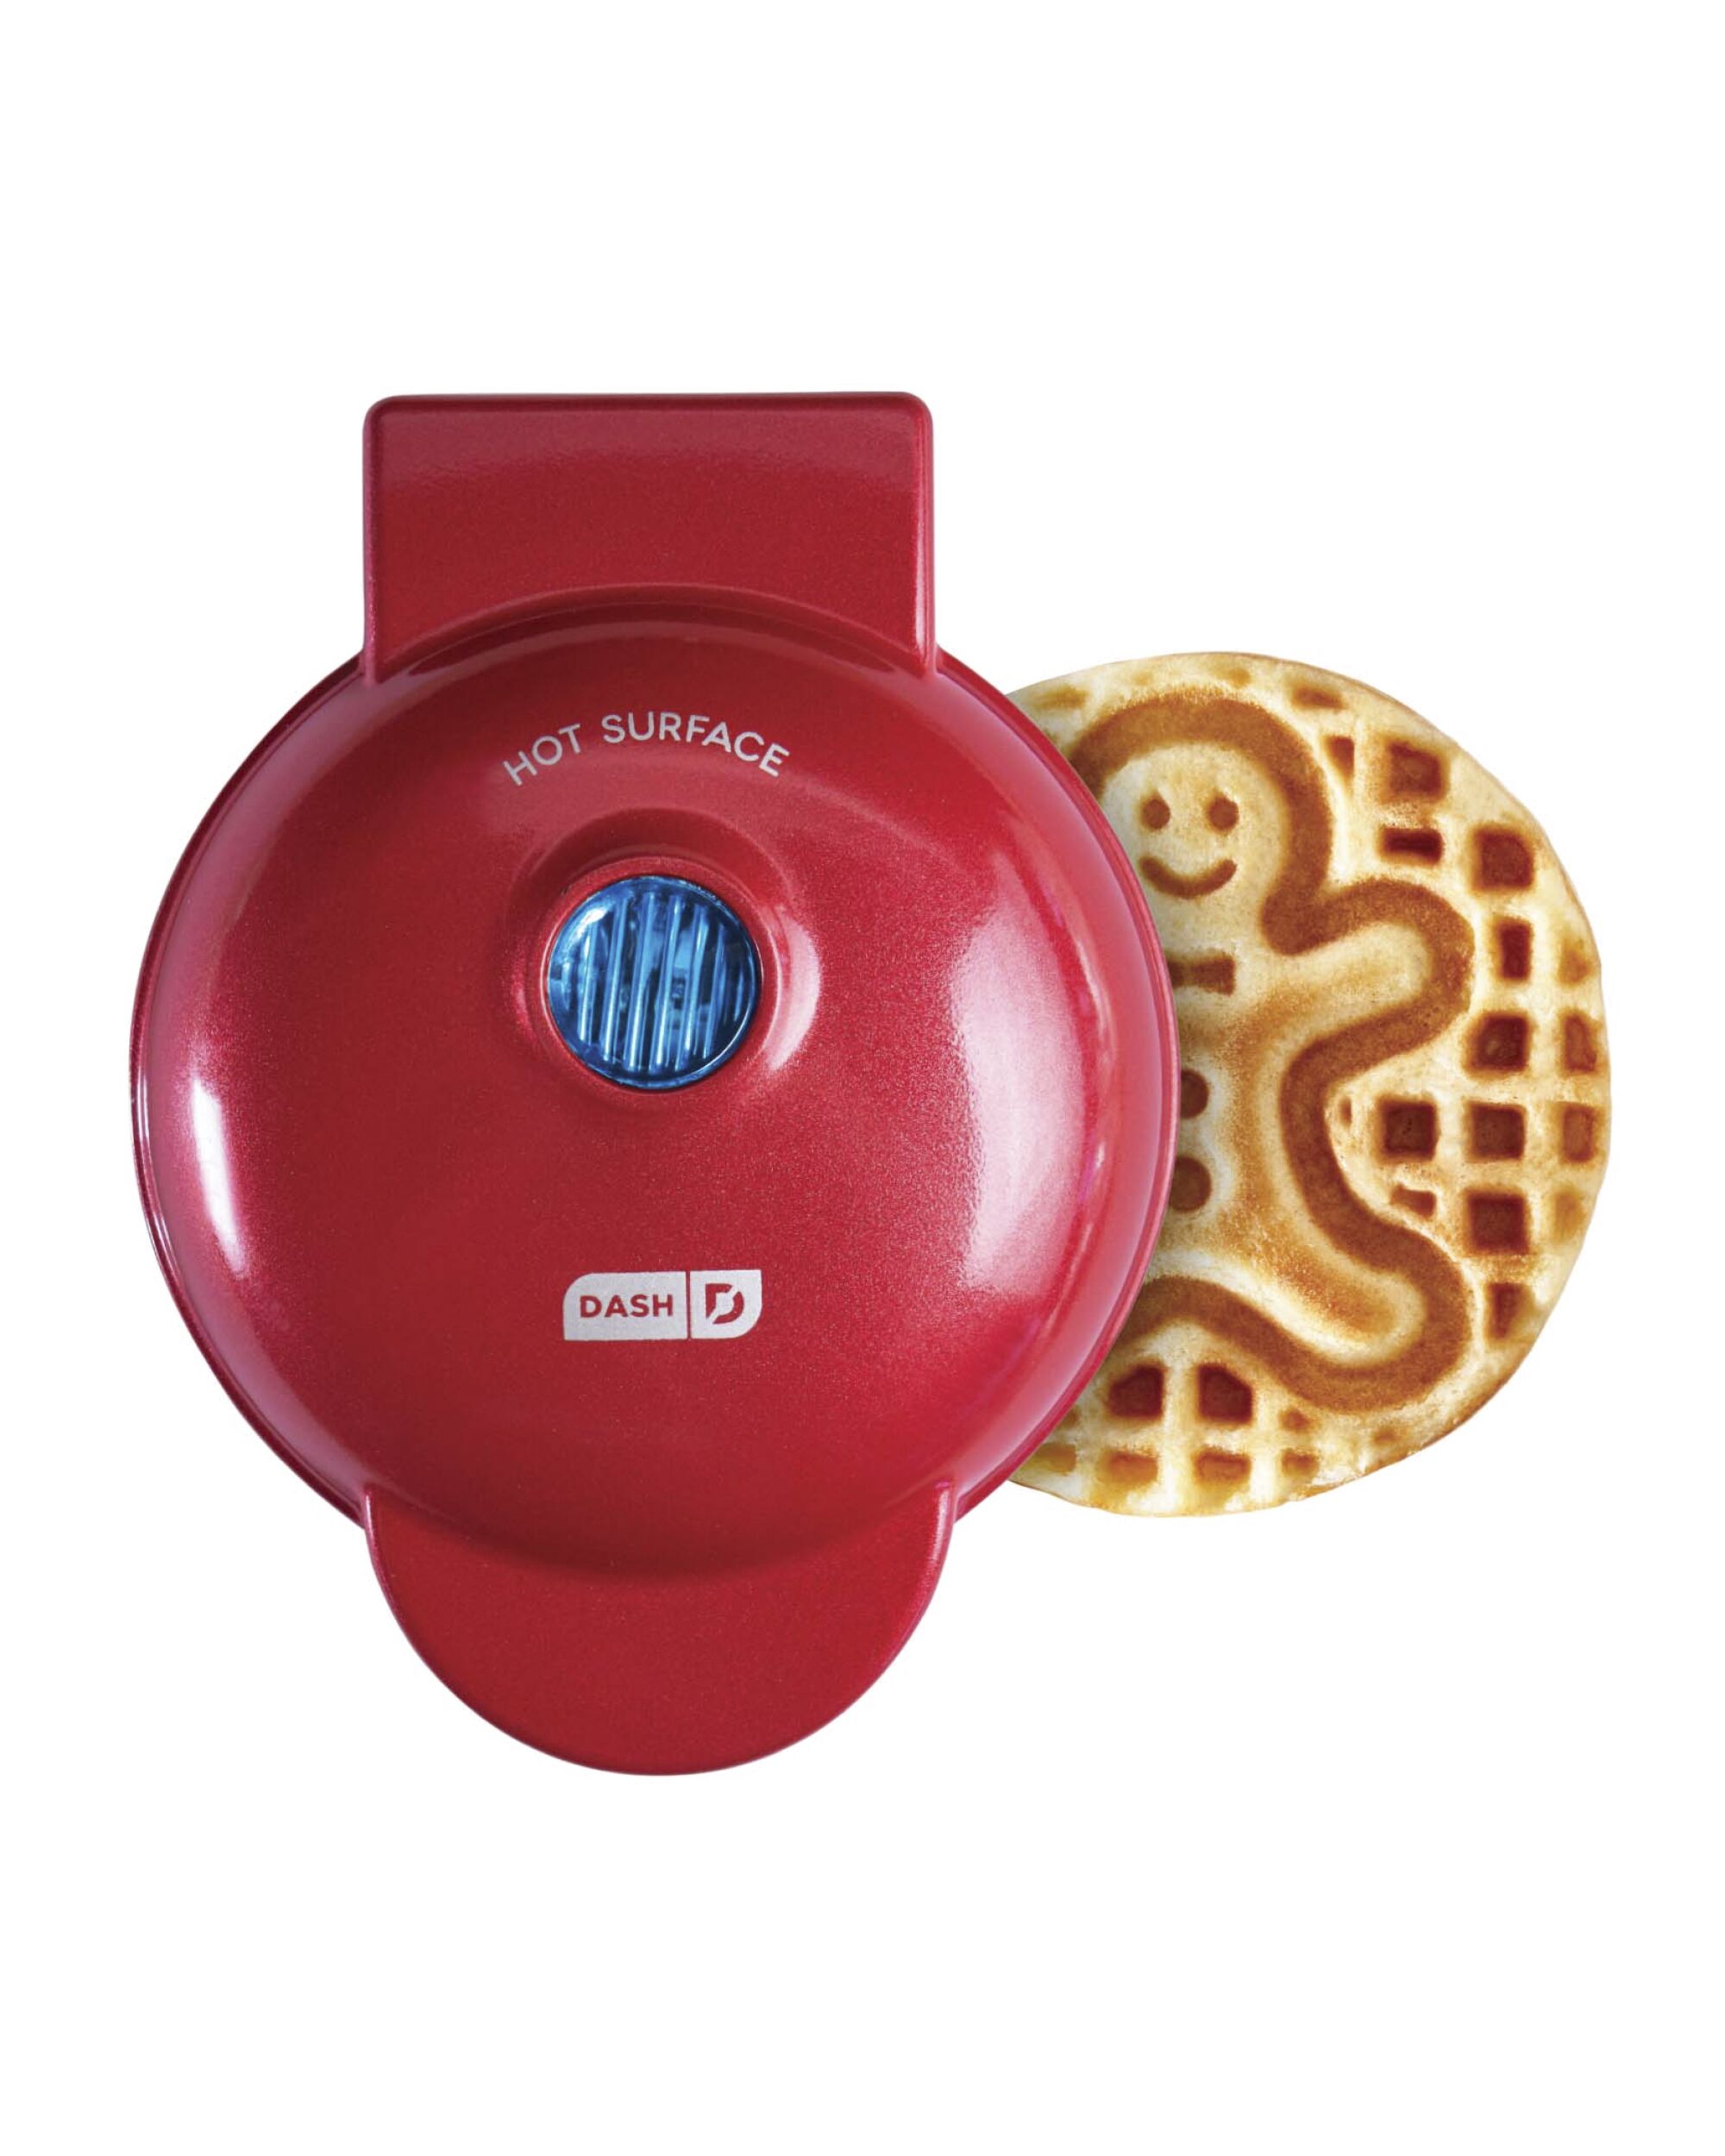 A Mini waffle maker by Dash and a gingerbread waffle